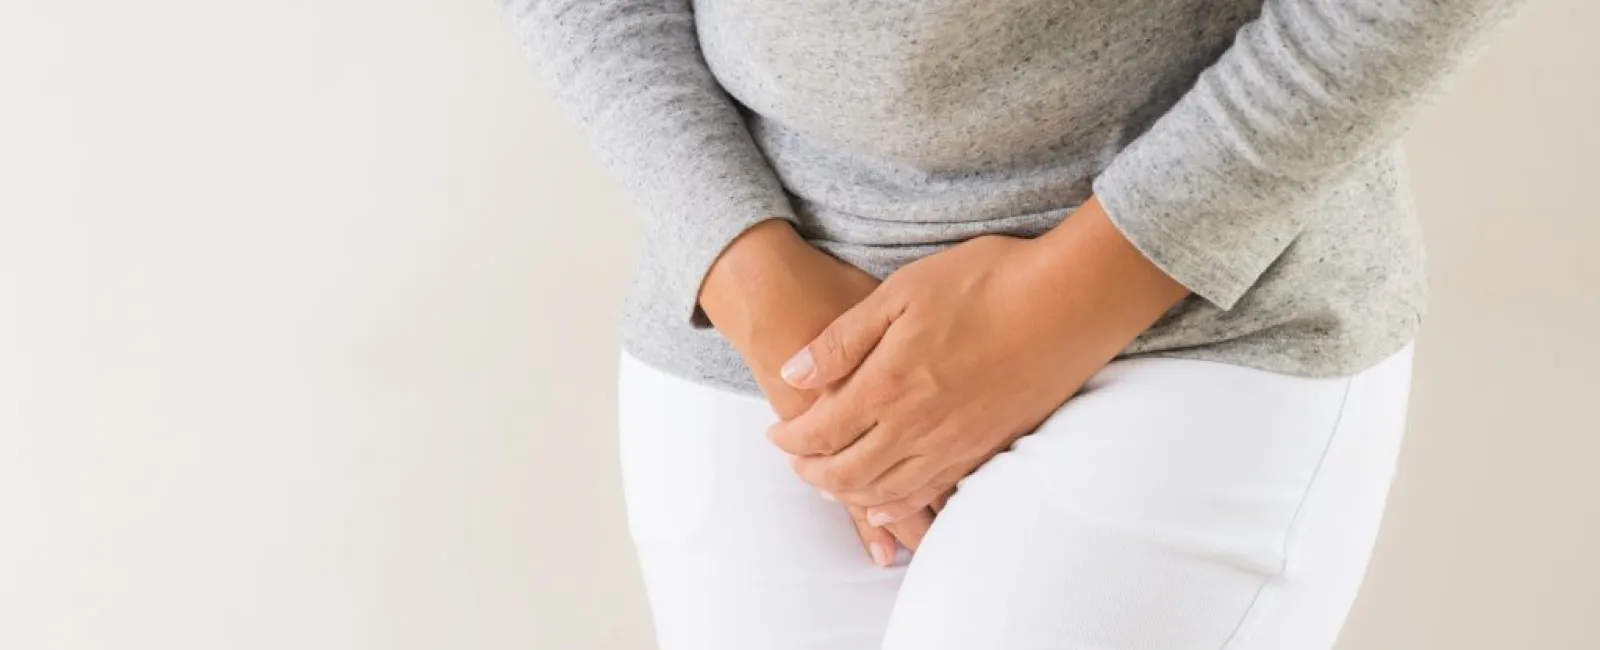 Do Natural Remedies for UTIs Work?